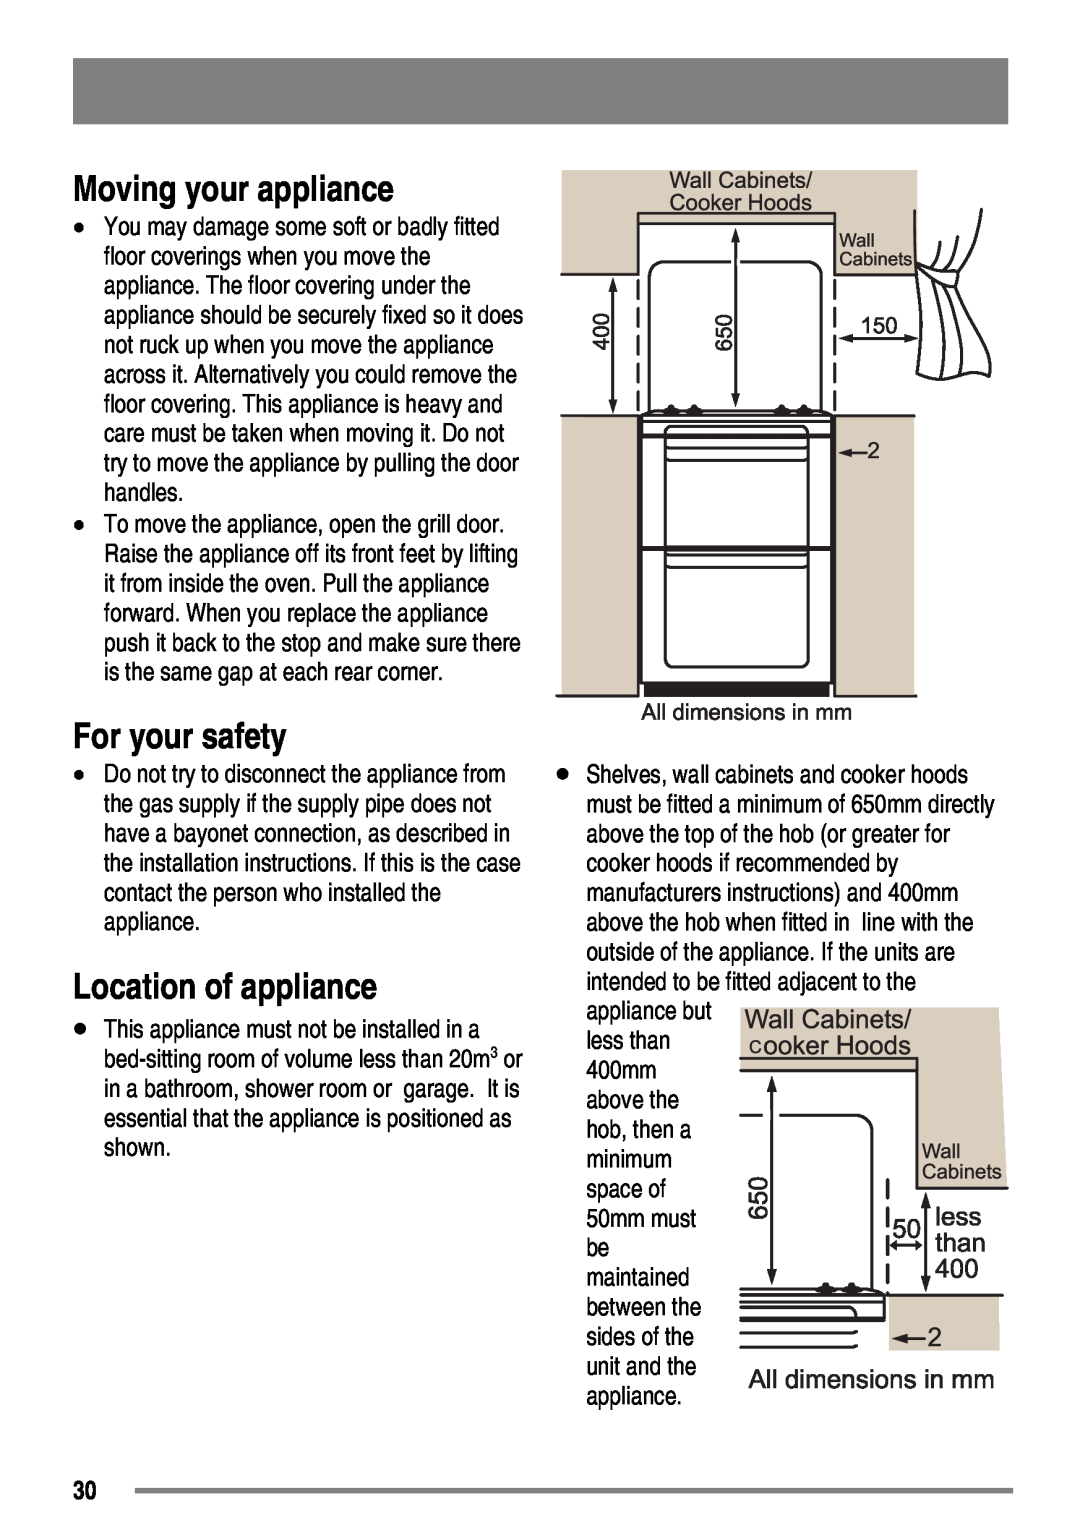 Zanussi ZKG6010 user manual Moving your appliance, For your safety, Location of appliance, above the 